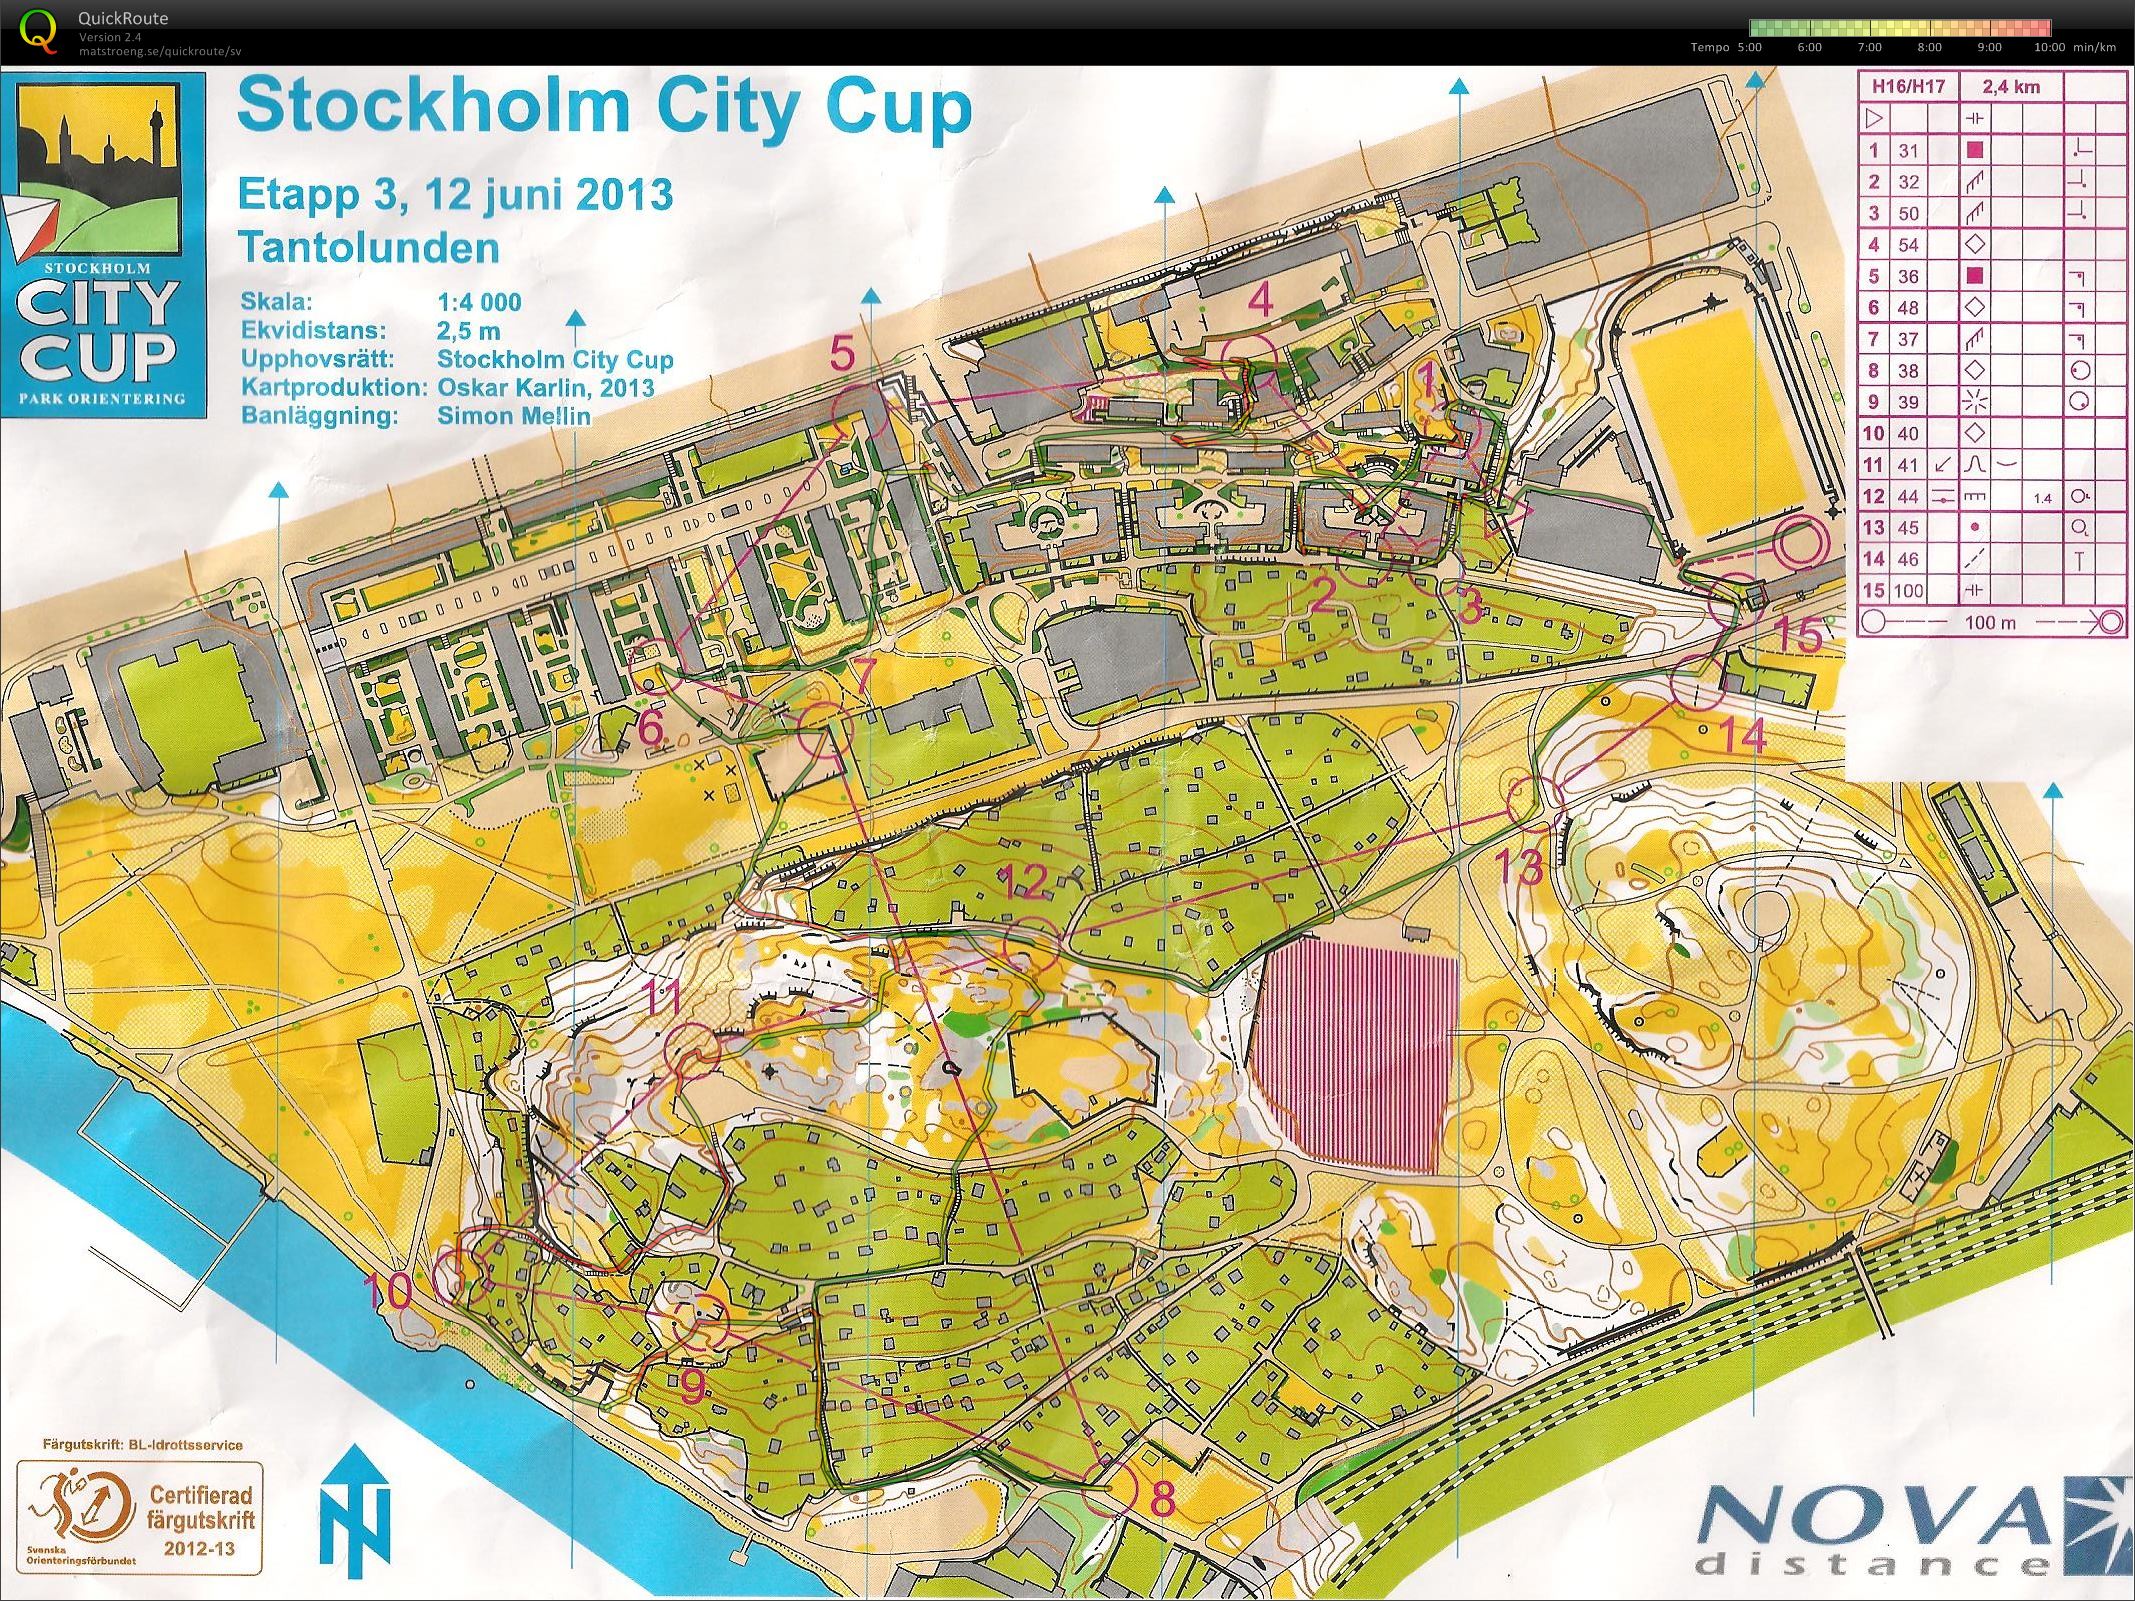 Stocholm City Cup 3 (2013-06-12)